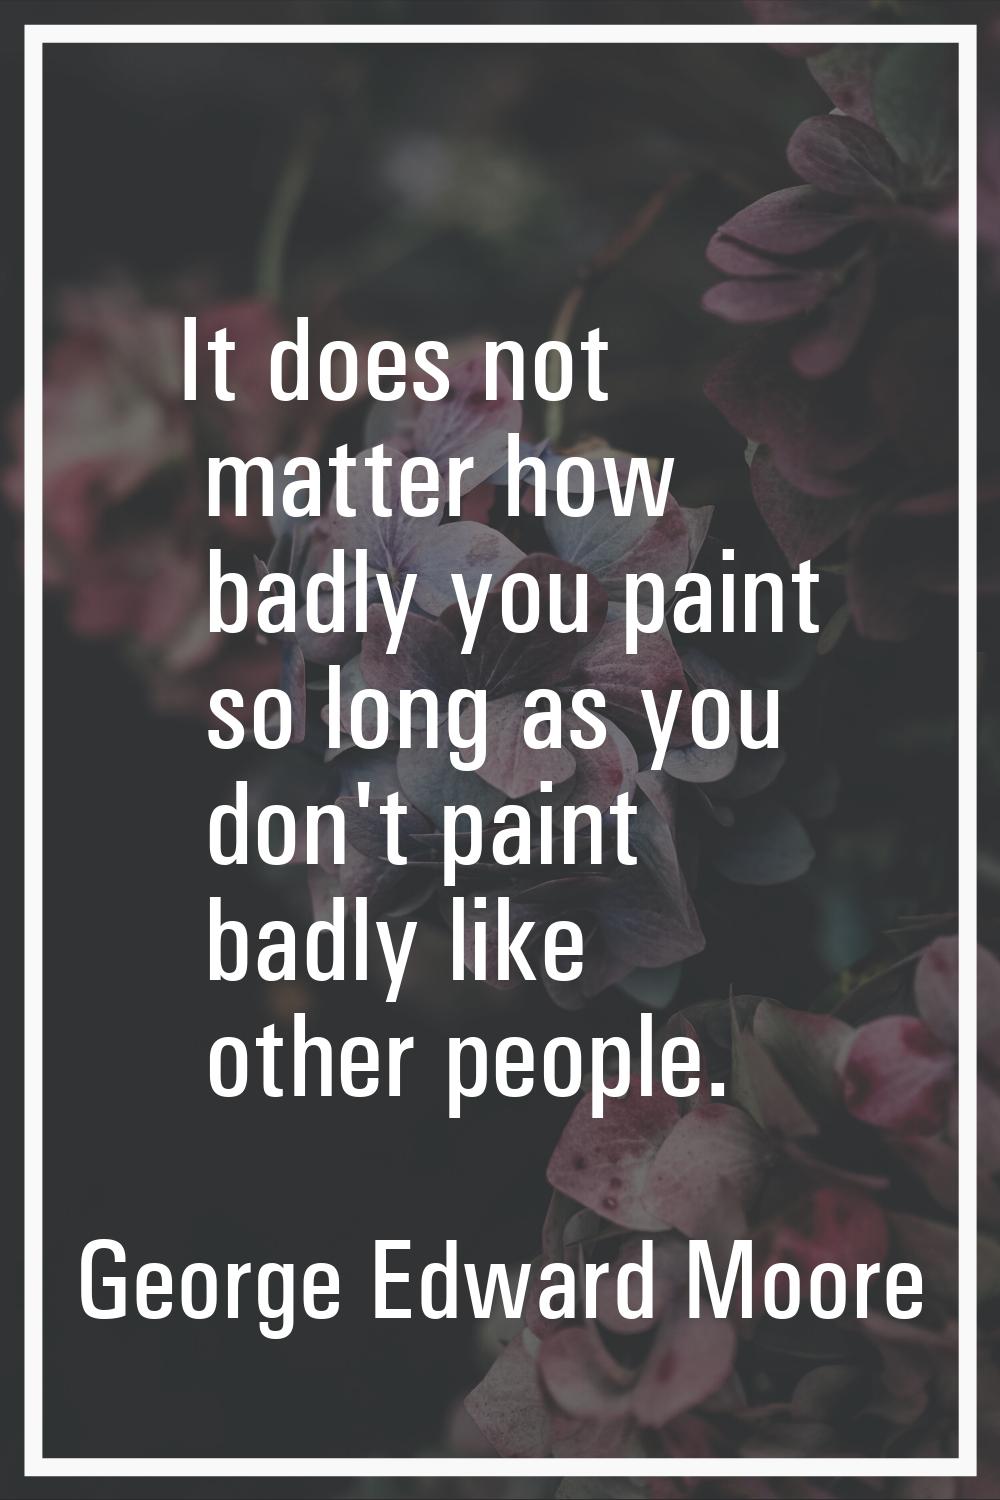 It does not matter how badly you paint so long as you don't paint badly like other people.